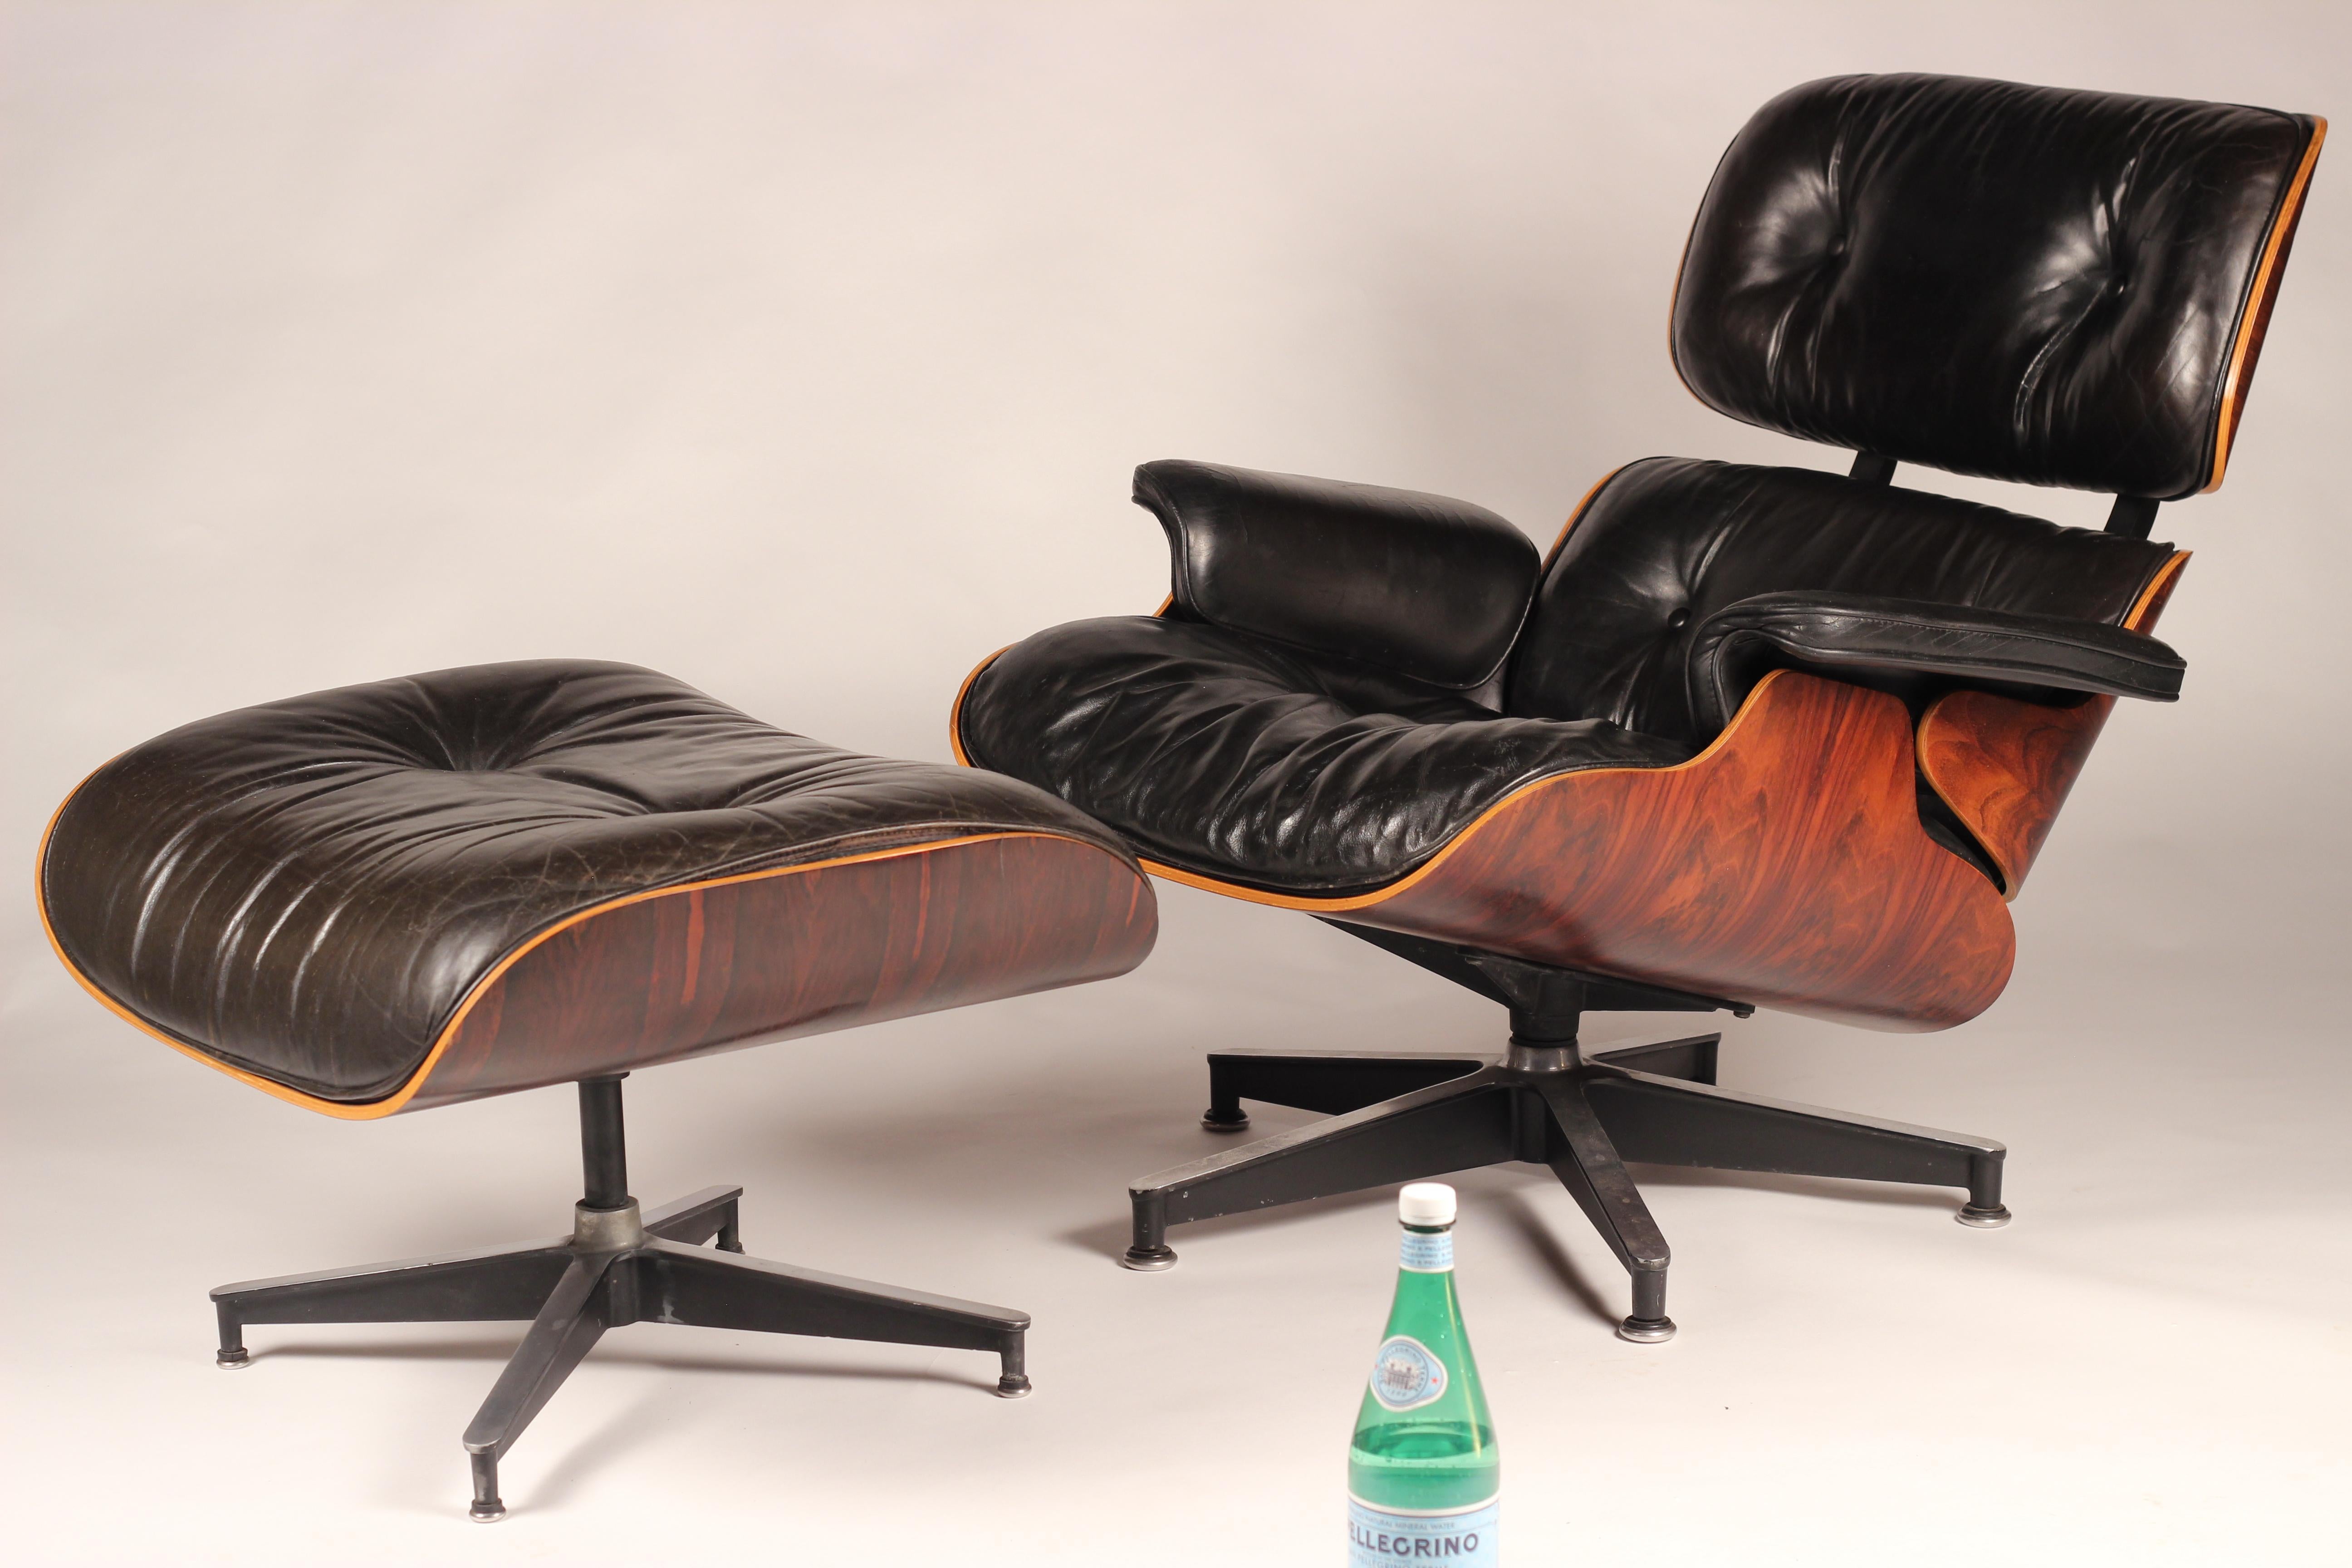 Charles and Ray Eames lounge chair

The Eames lounge chair and ottoman are furnishings made of molded plywood and leather, designed by Charles and Ray Eames for the Herman Miller furniture company. They are officially titled Eames lounge 670 and